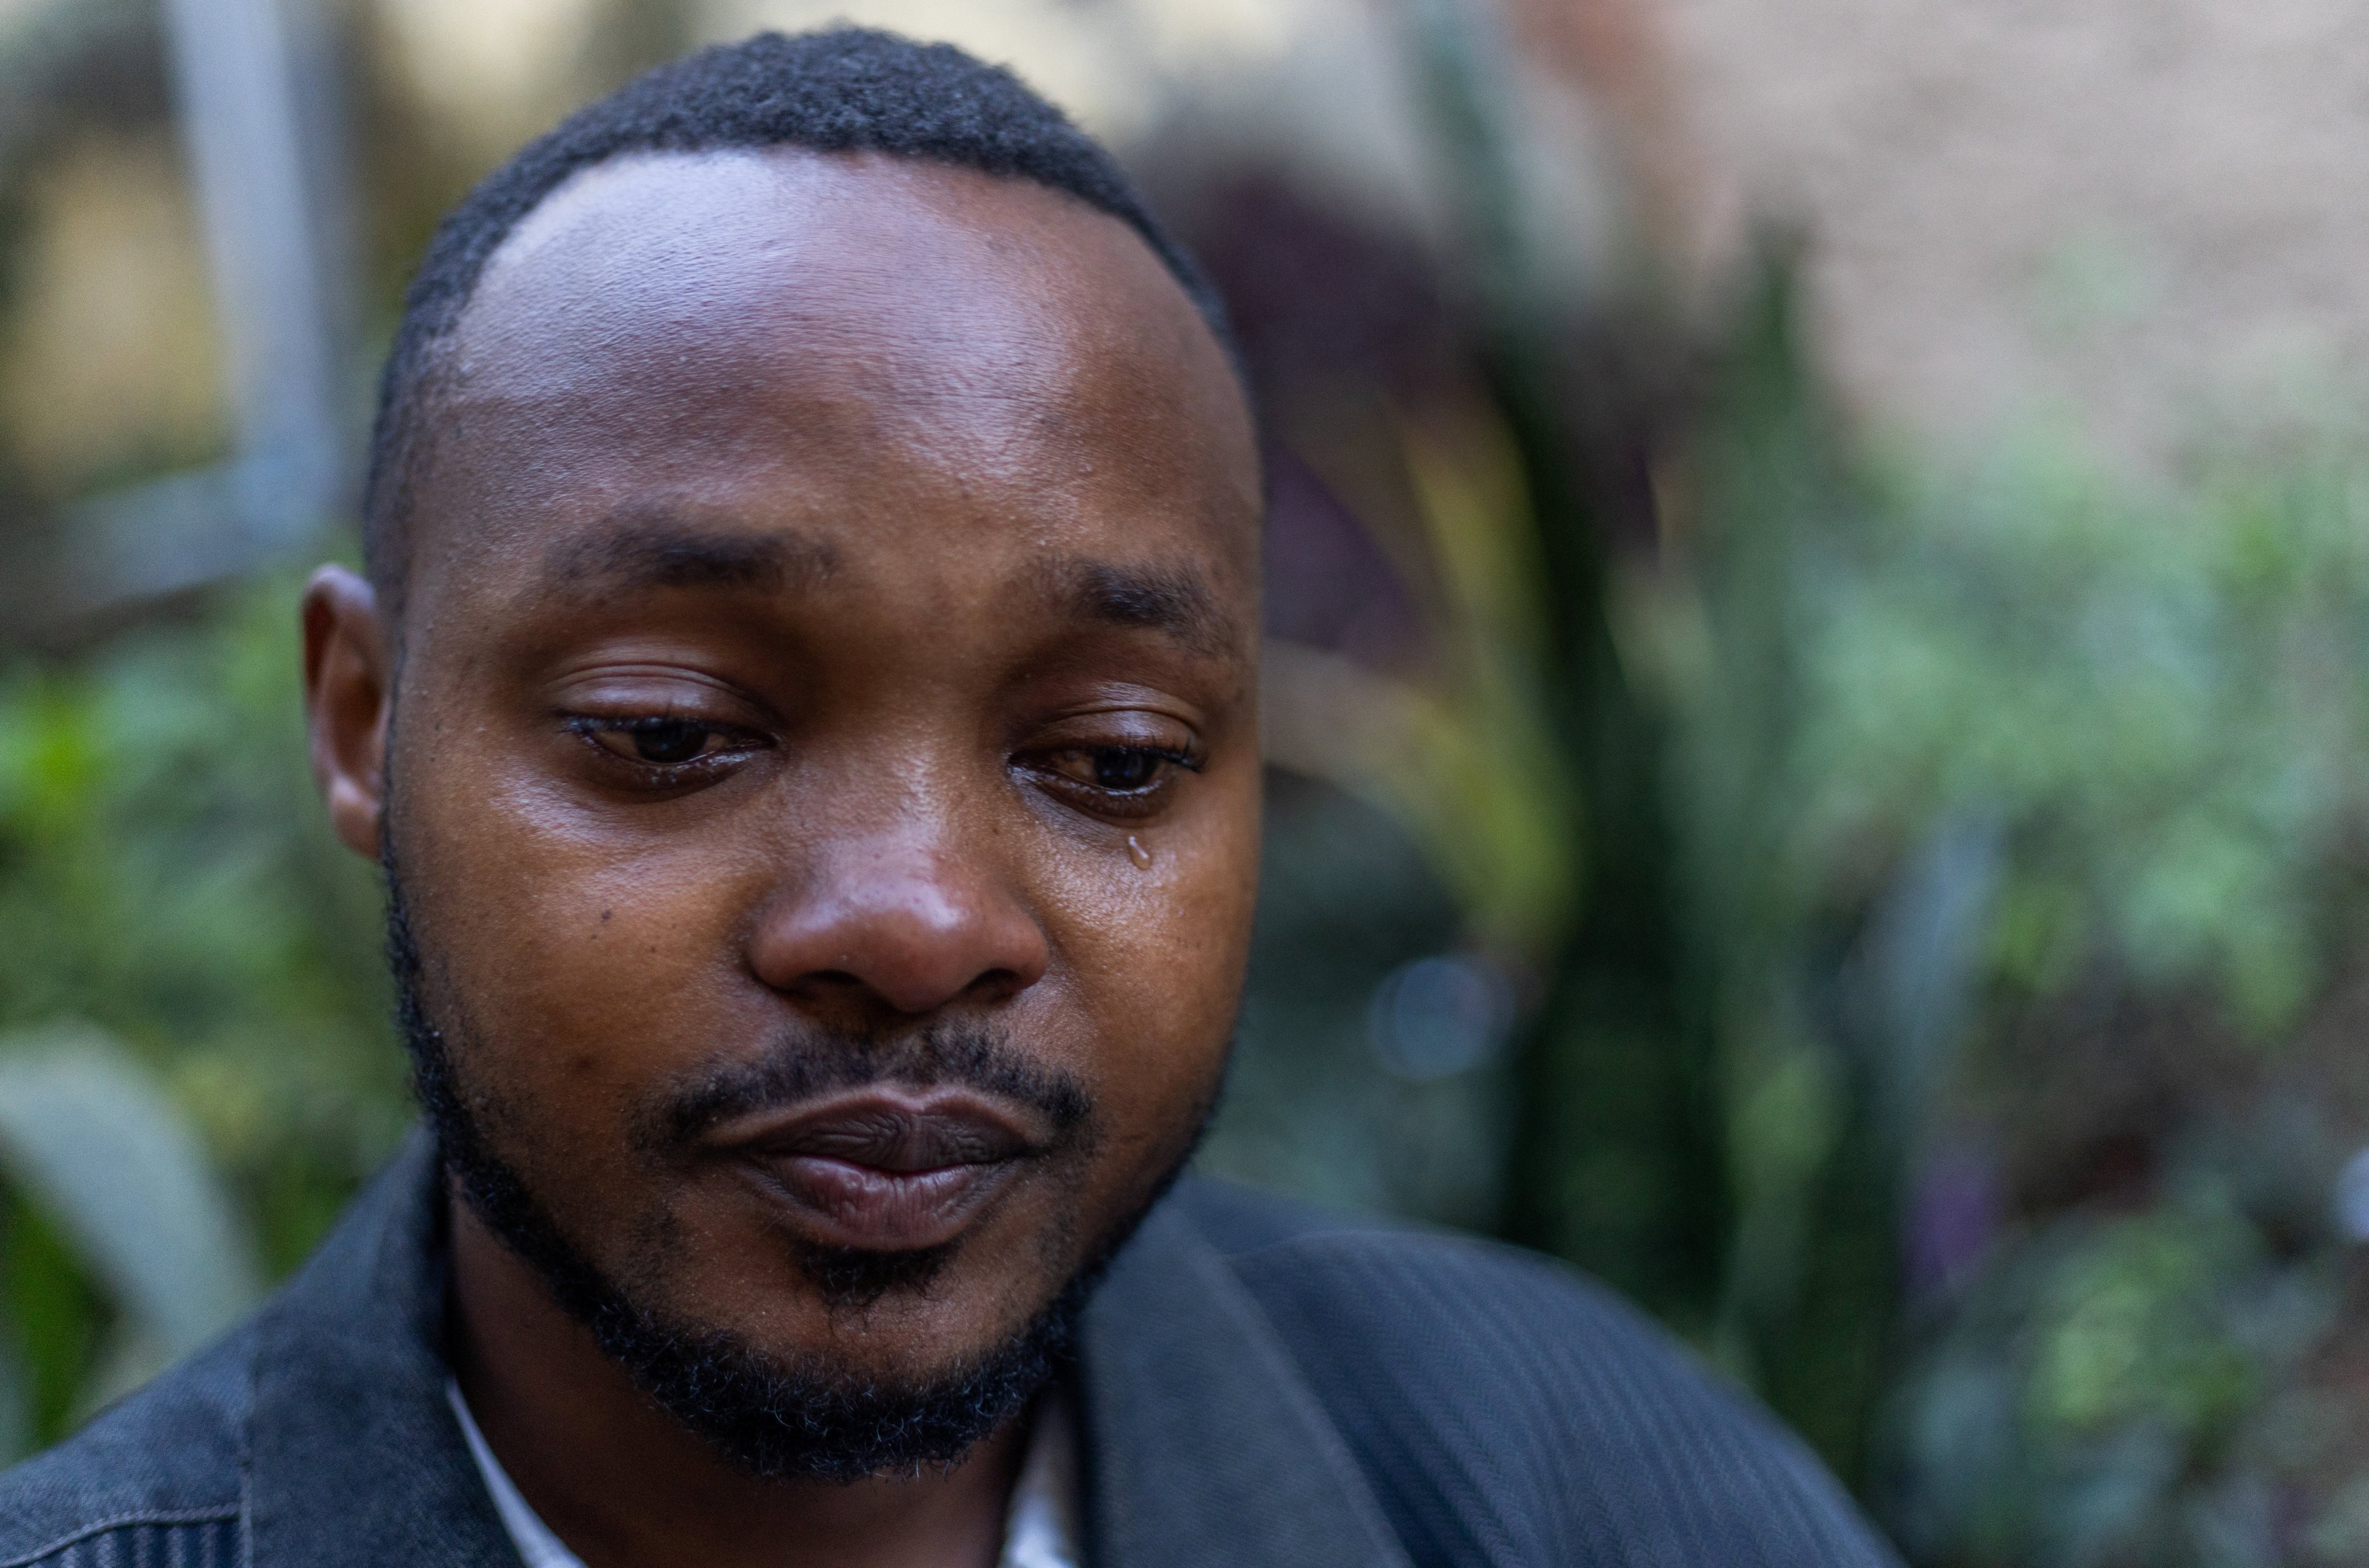 Eric Igiraneza reacts during an interview about his experiences of his mother rejecting him after he was born because she was raped during the Rwandan genocide in 1994. Photo: Reuters